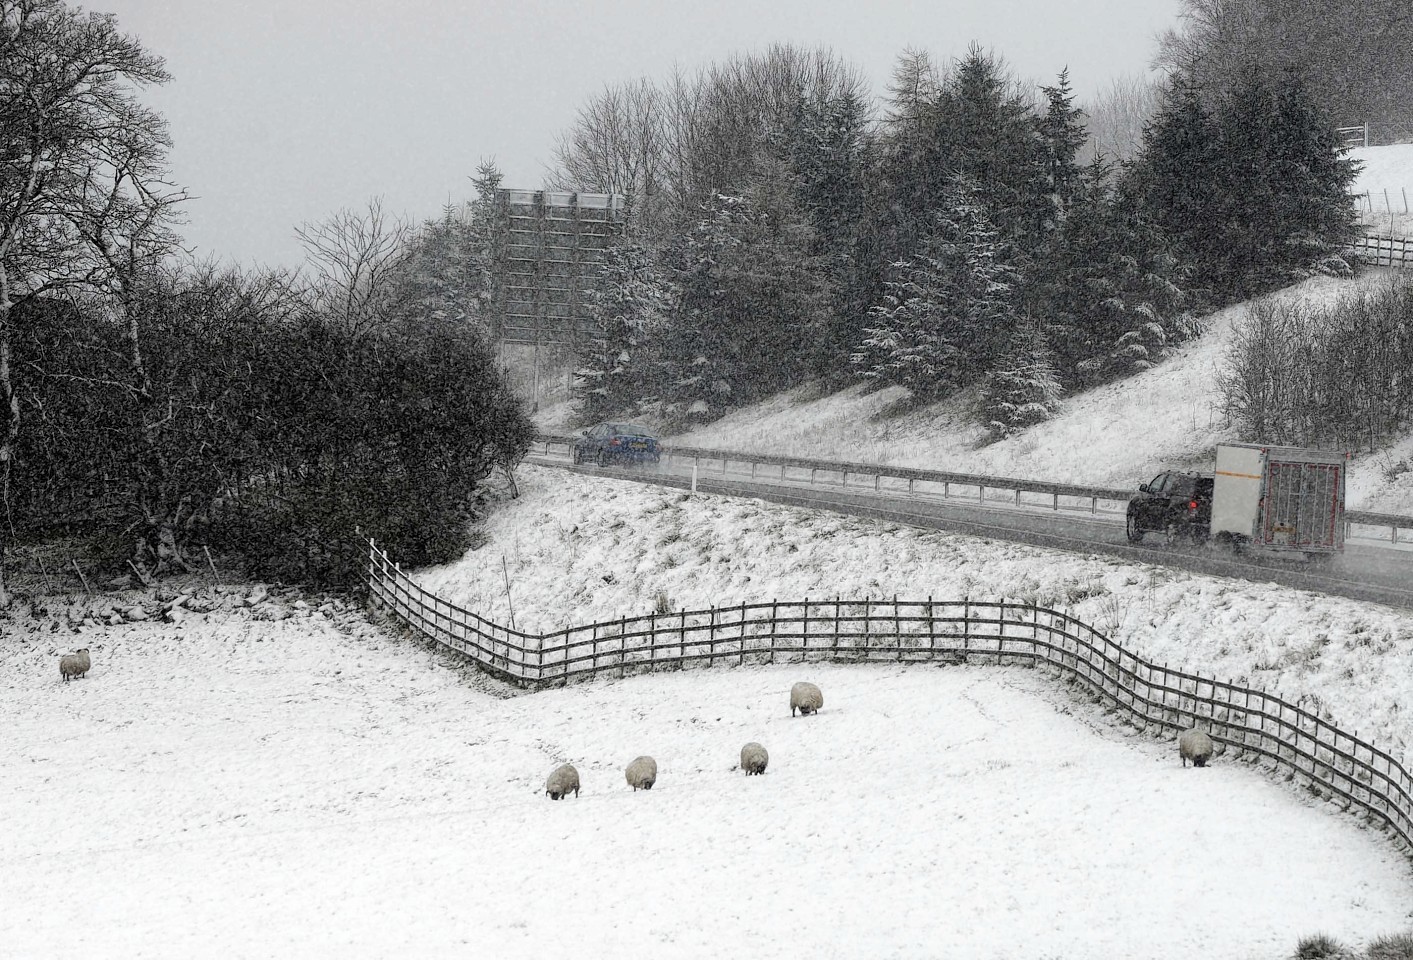 Scotland looks set for a wintry Bank Holiday weekend